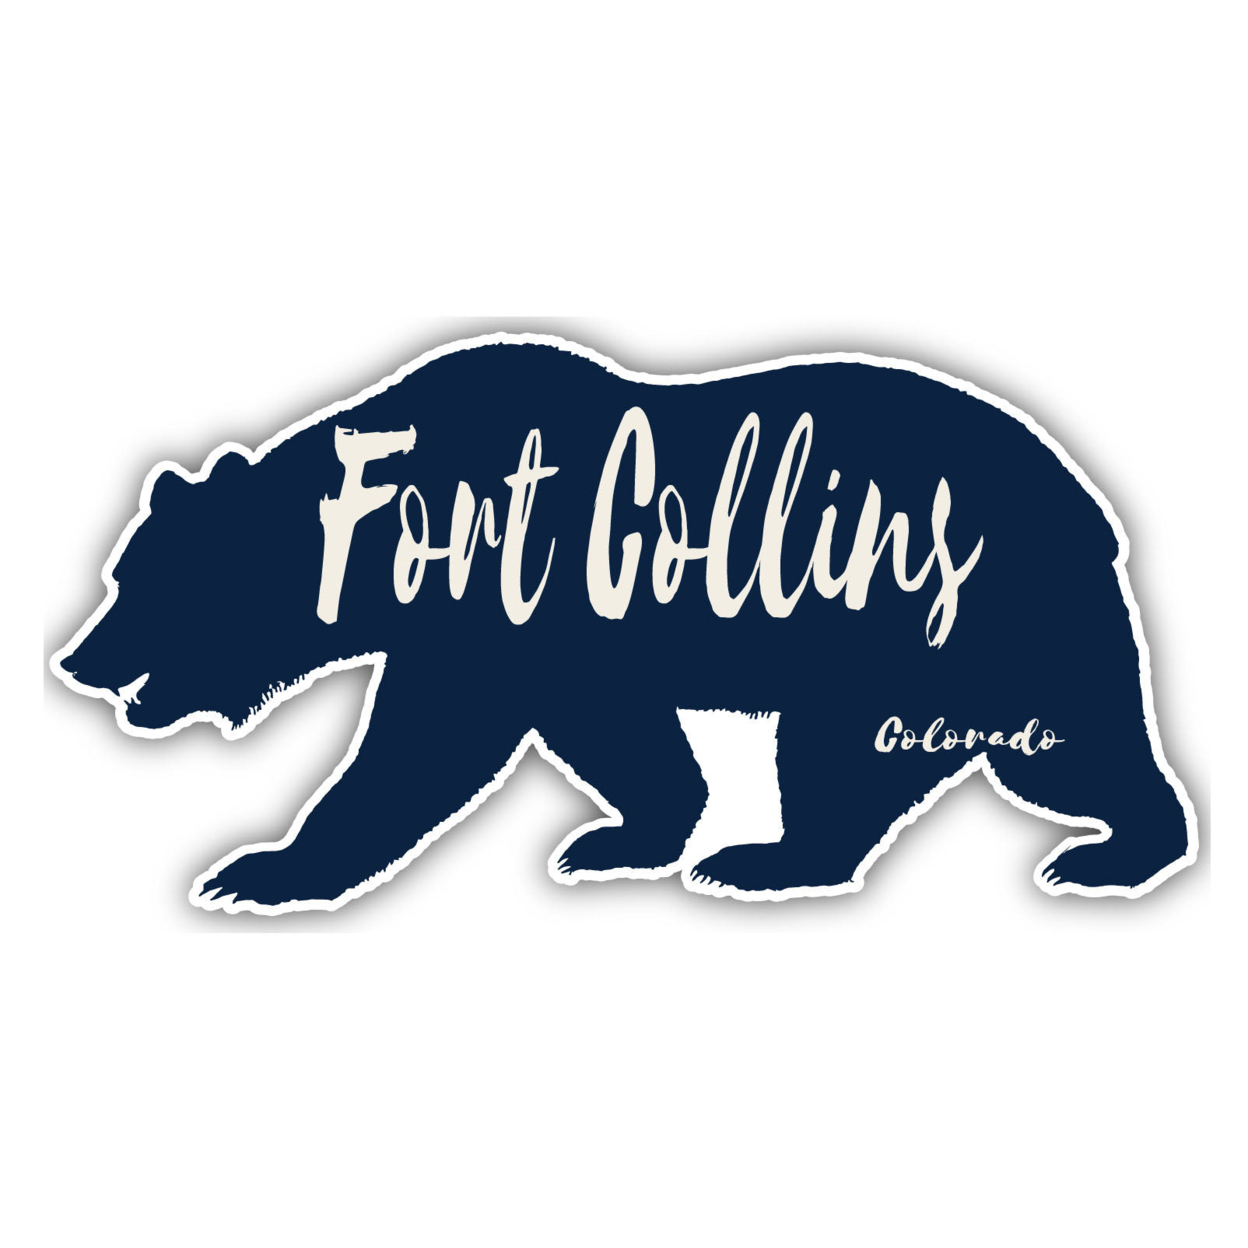 Fort Collins Colorado Souvenir Decorative Stickers (Choose Theme And Size) - 4-Pack, 10-Inch, Great Outdoors